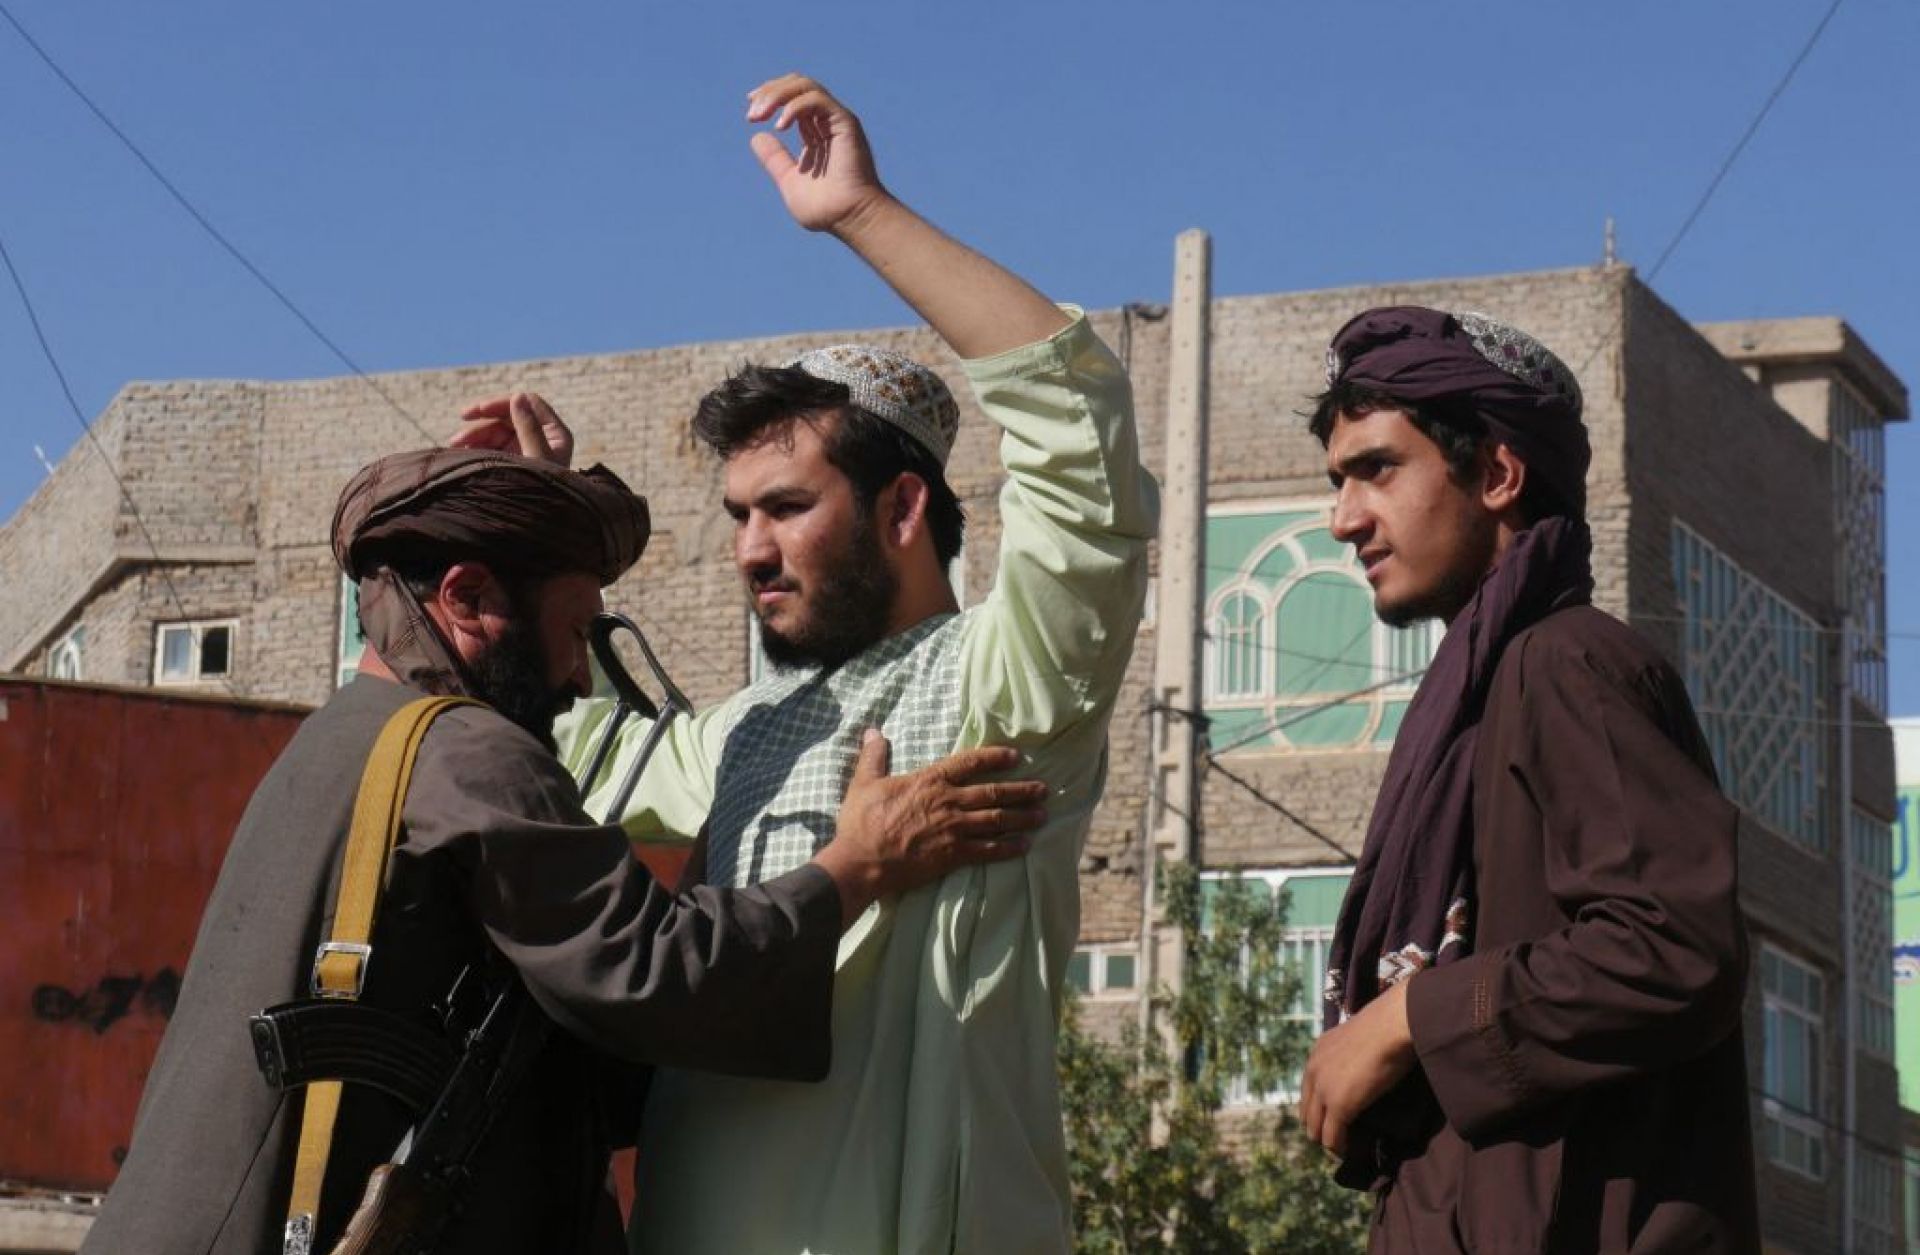 A Taliban fighter (L) frisks men at a checkpoint after a blast during Friday prayers Sept. 2, 2022, in Gazargah mosque in Herat.